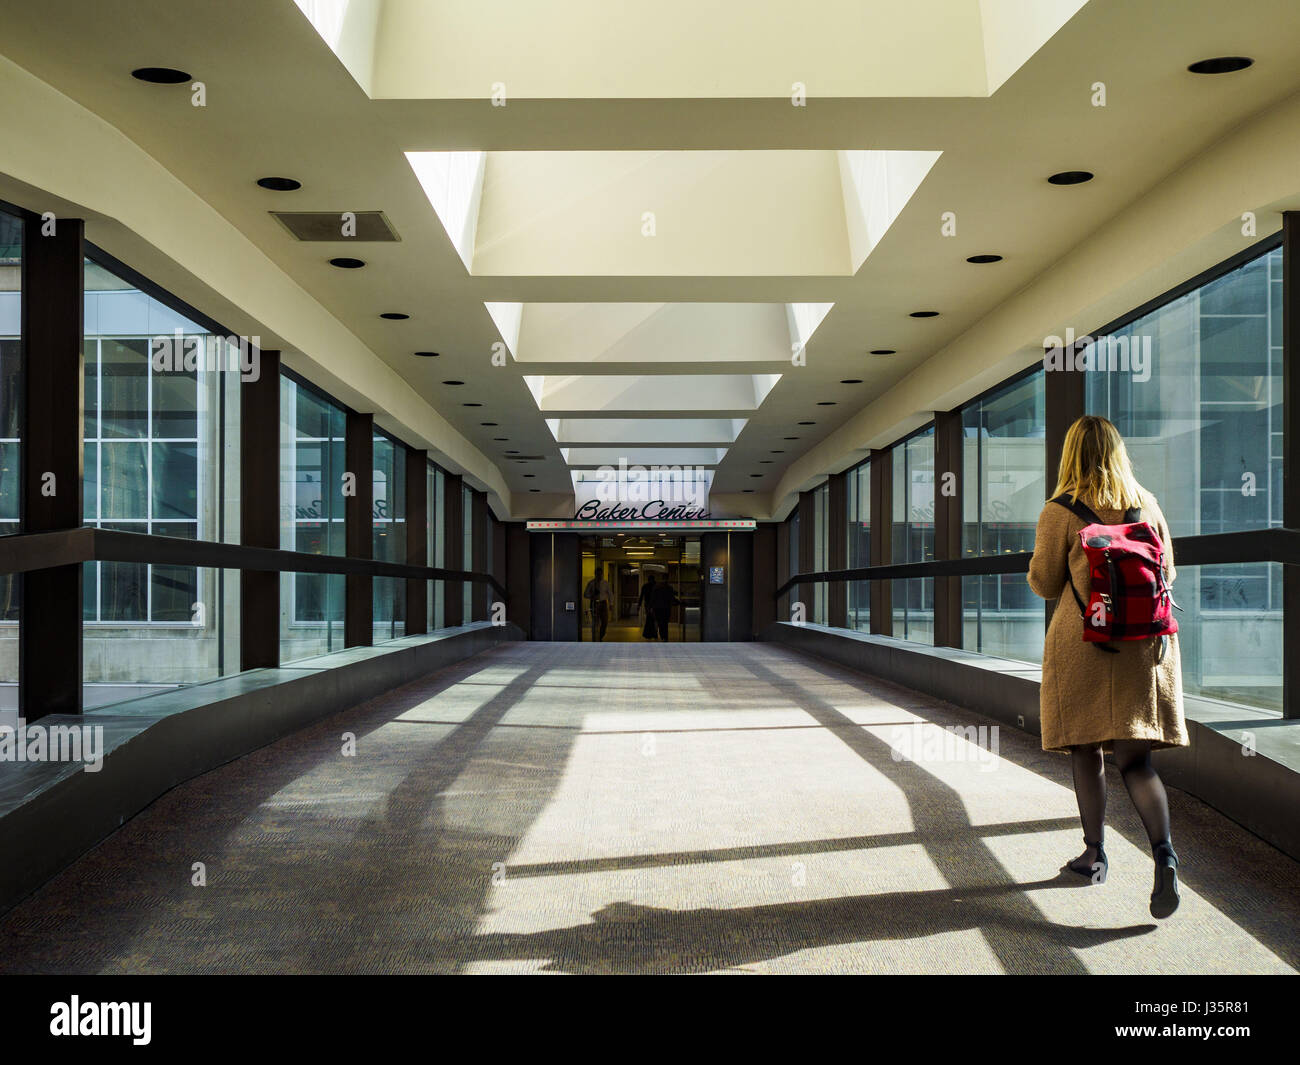 May 3, 2017 - Minneapolis, Minnesota, U.S - The skyway going into Baker Center, a newer building in downtown Minneapolis. The skyways are enclosed pedestrian overpasses that connect downtown buildings. The Minneapolis Skyway was started in the early 1960s as a response to covered shopping malls in the suburbs that were drawing shoppers out of the downtown area. The system grew sporadically until 1974, when the construction of the IDS Center and its center atrium, called the Crystal Court, served as a hub for the downtown skyway system. There are 8 miles of skyways, connecting most of the downt Stock Photo